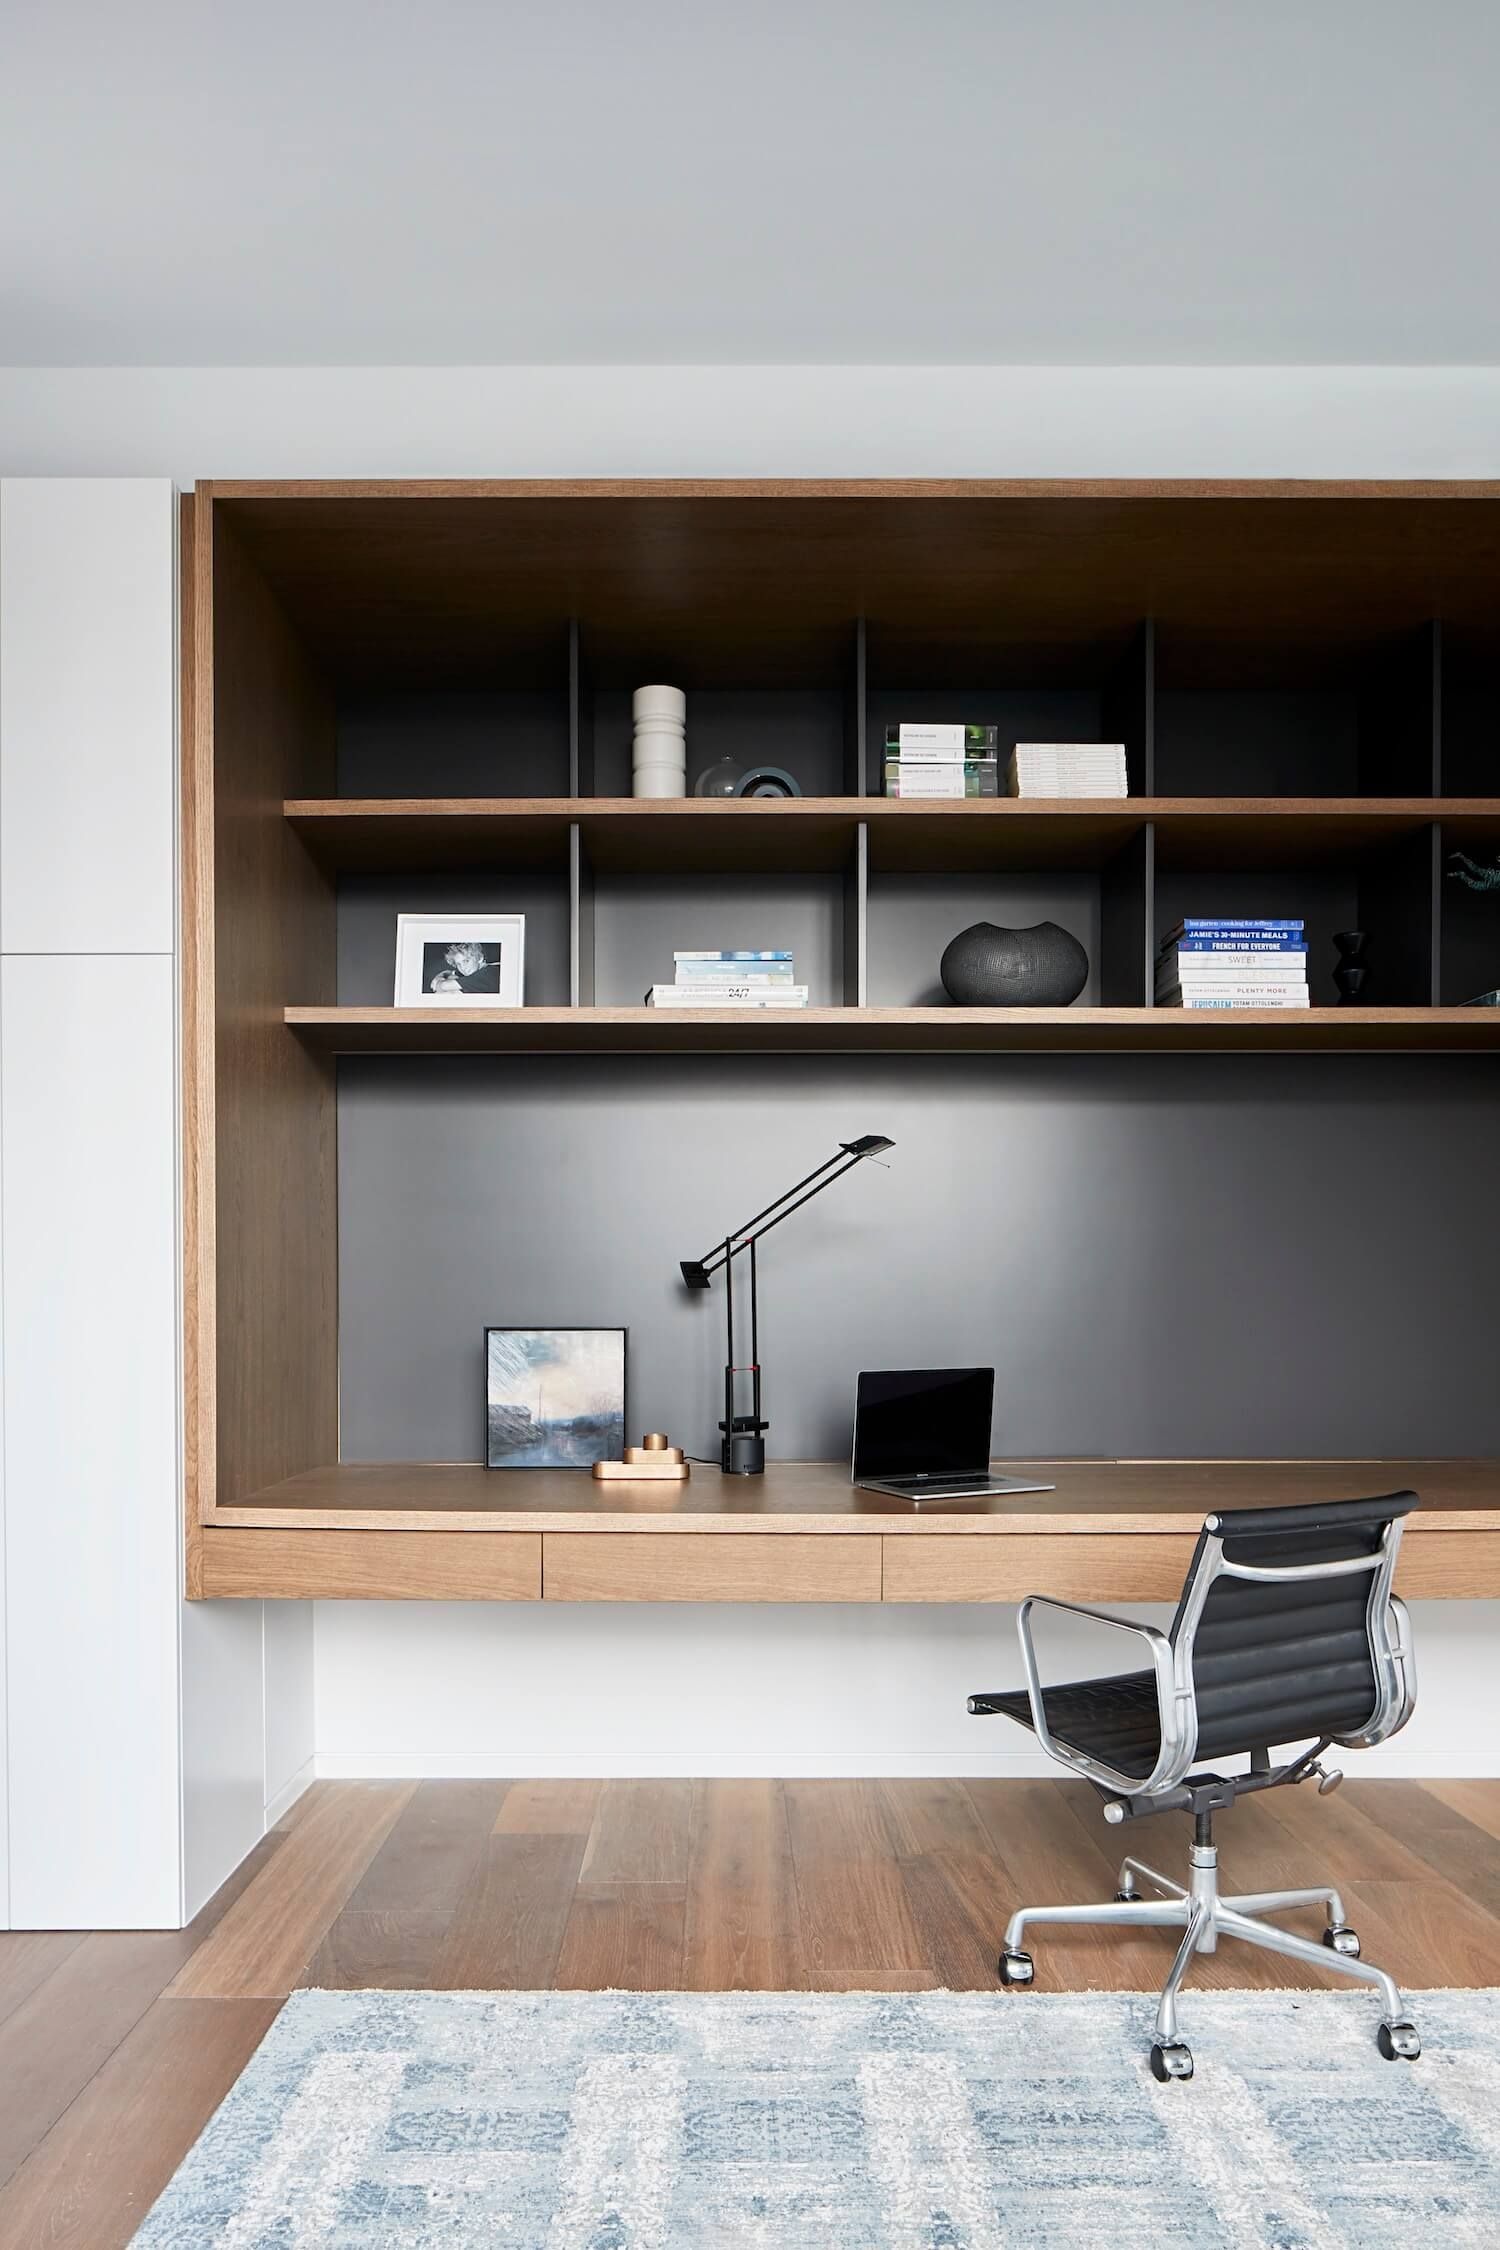 A Wide Wall Storage for Home Office